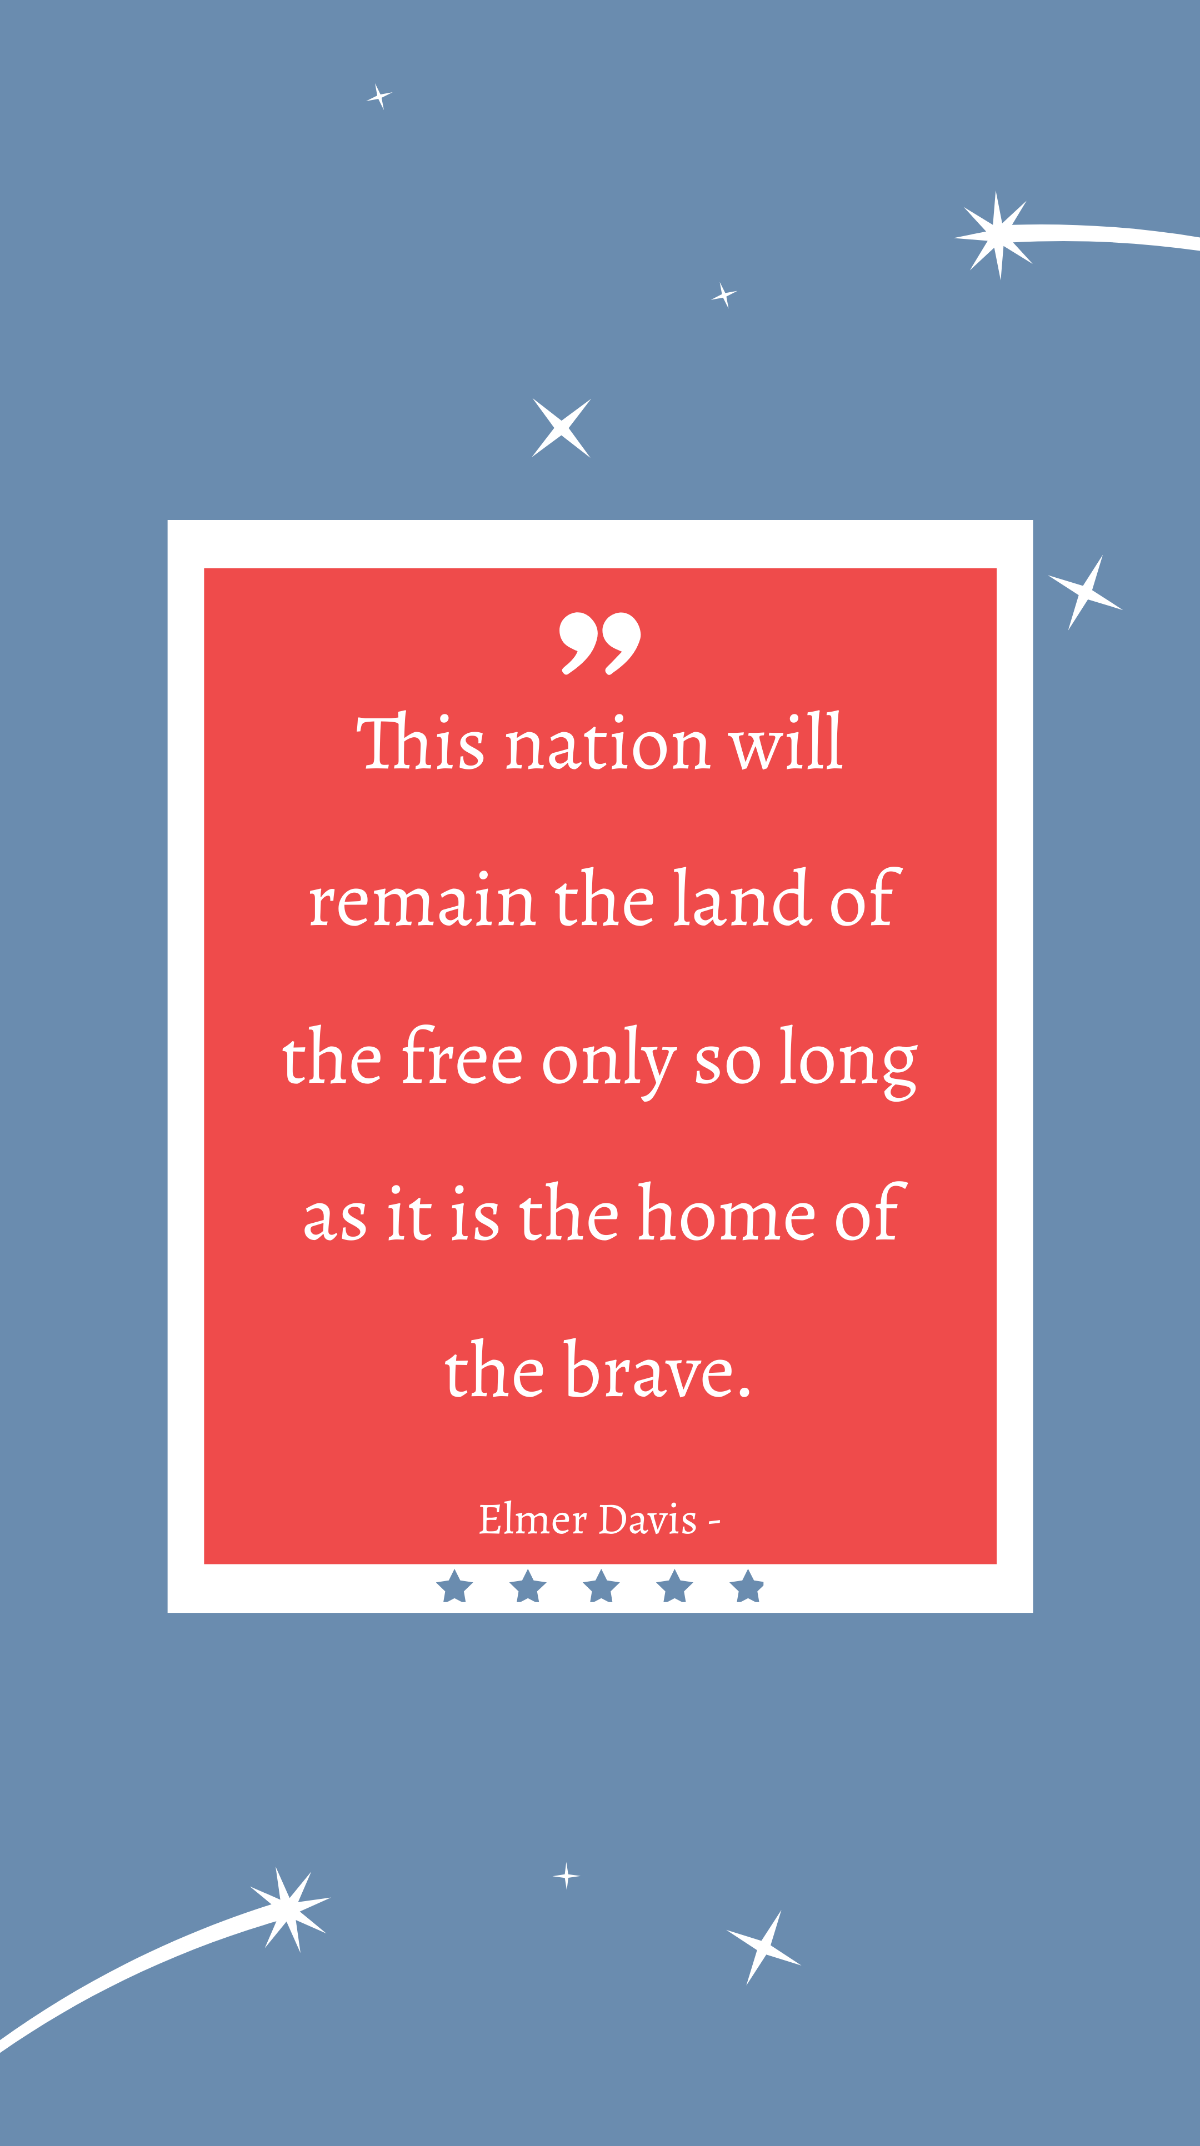 Elmer Davis - This nation will remain the land of the only so long as it is the home of the brave.